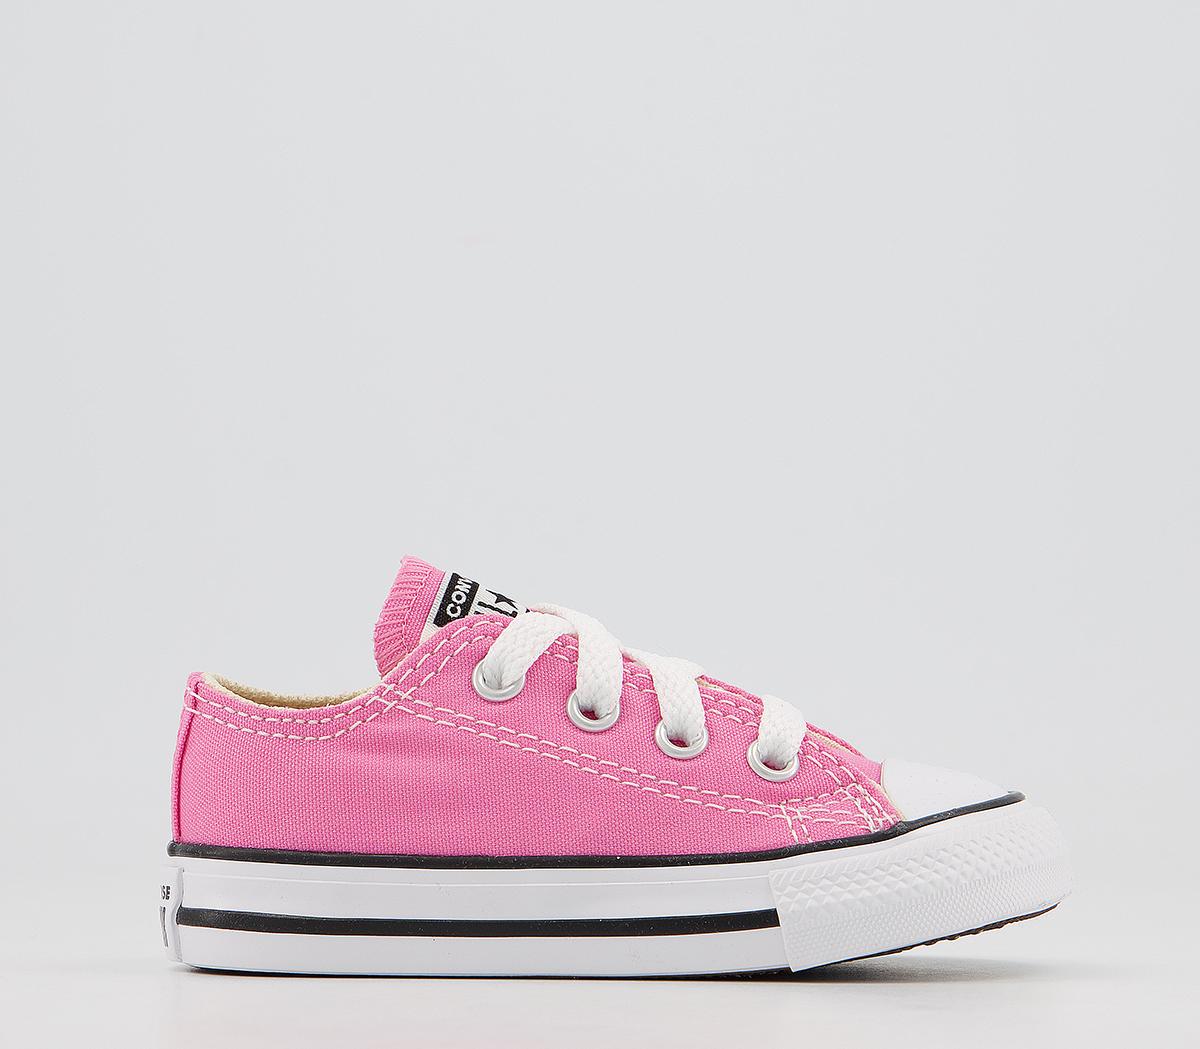 Converse All Star Low Infant Trainers Pink - Unisex